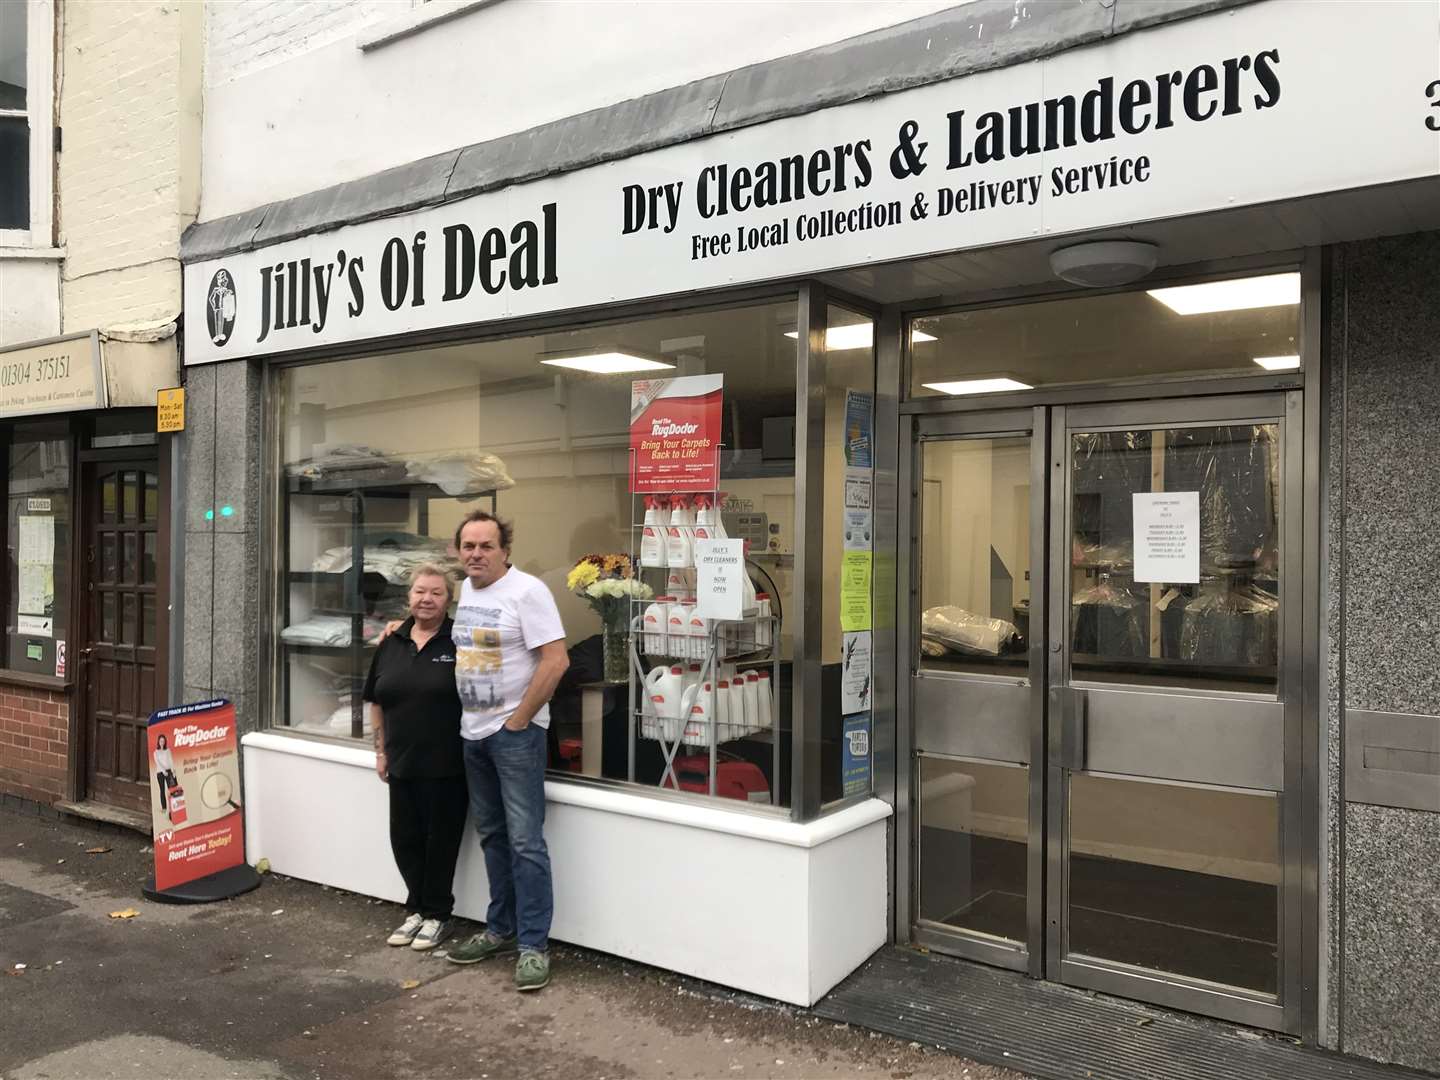 Jilly's Dry Cleaners in Deal has reopened (21699390)